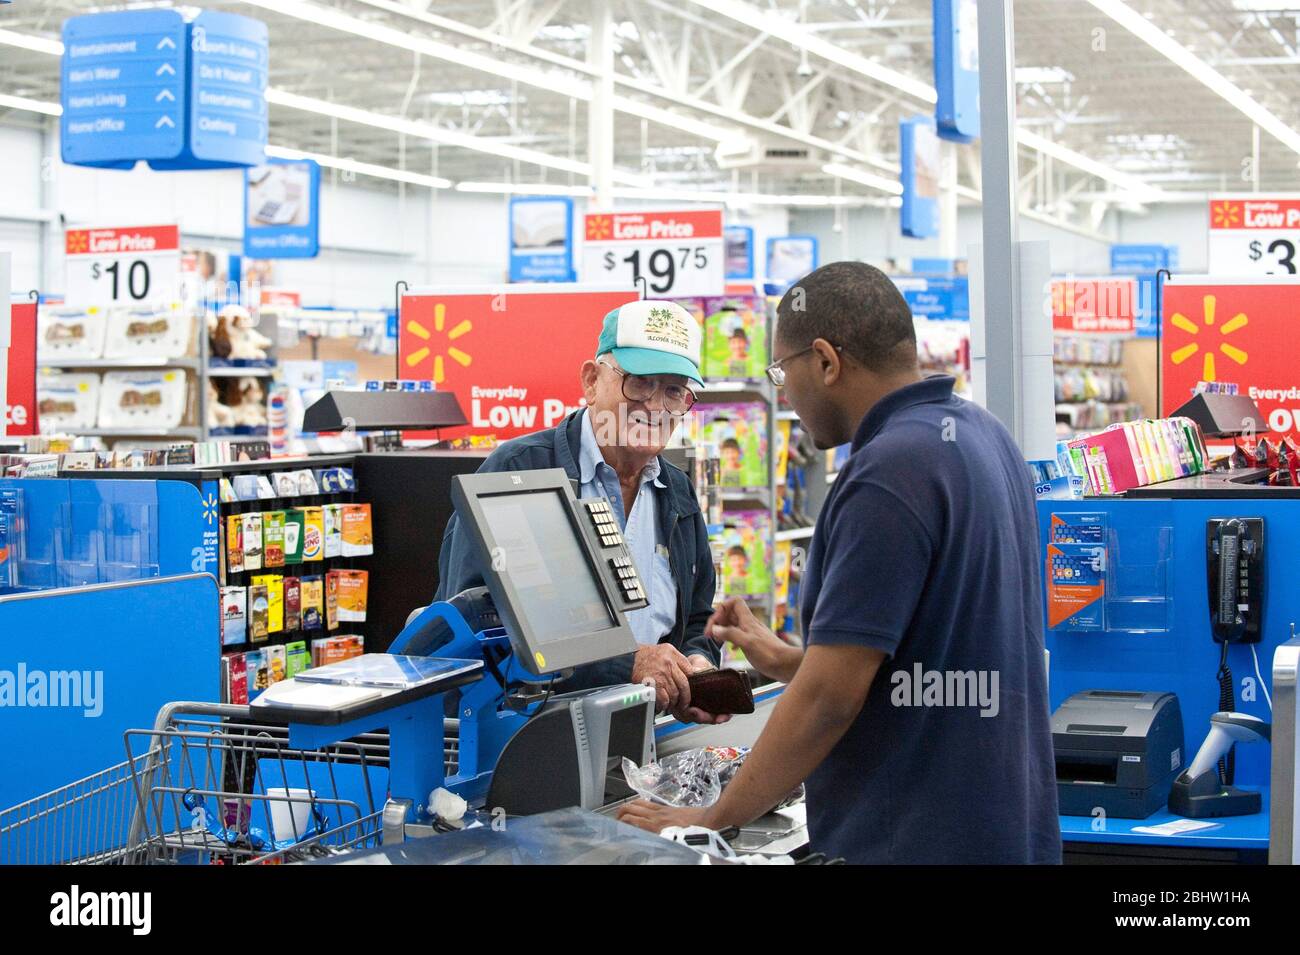 Austin Texas USA, October 26 2010: African American cashier helps senior citizen check out at new Walmart store. ©Marjorie Kamys Cotera/Daemmrich Photography Stock Photo